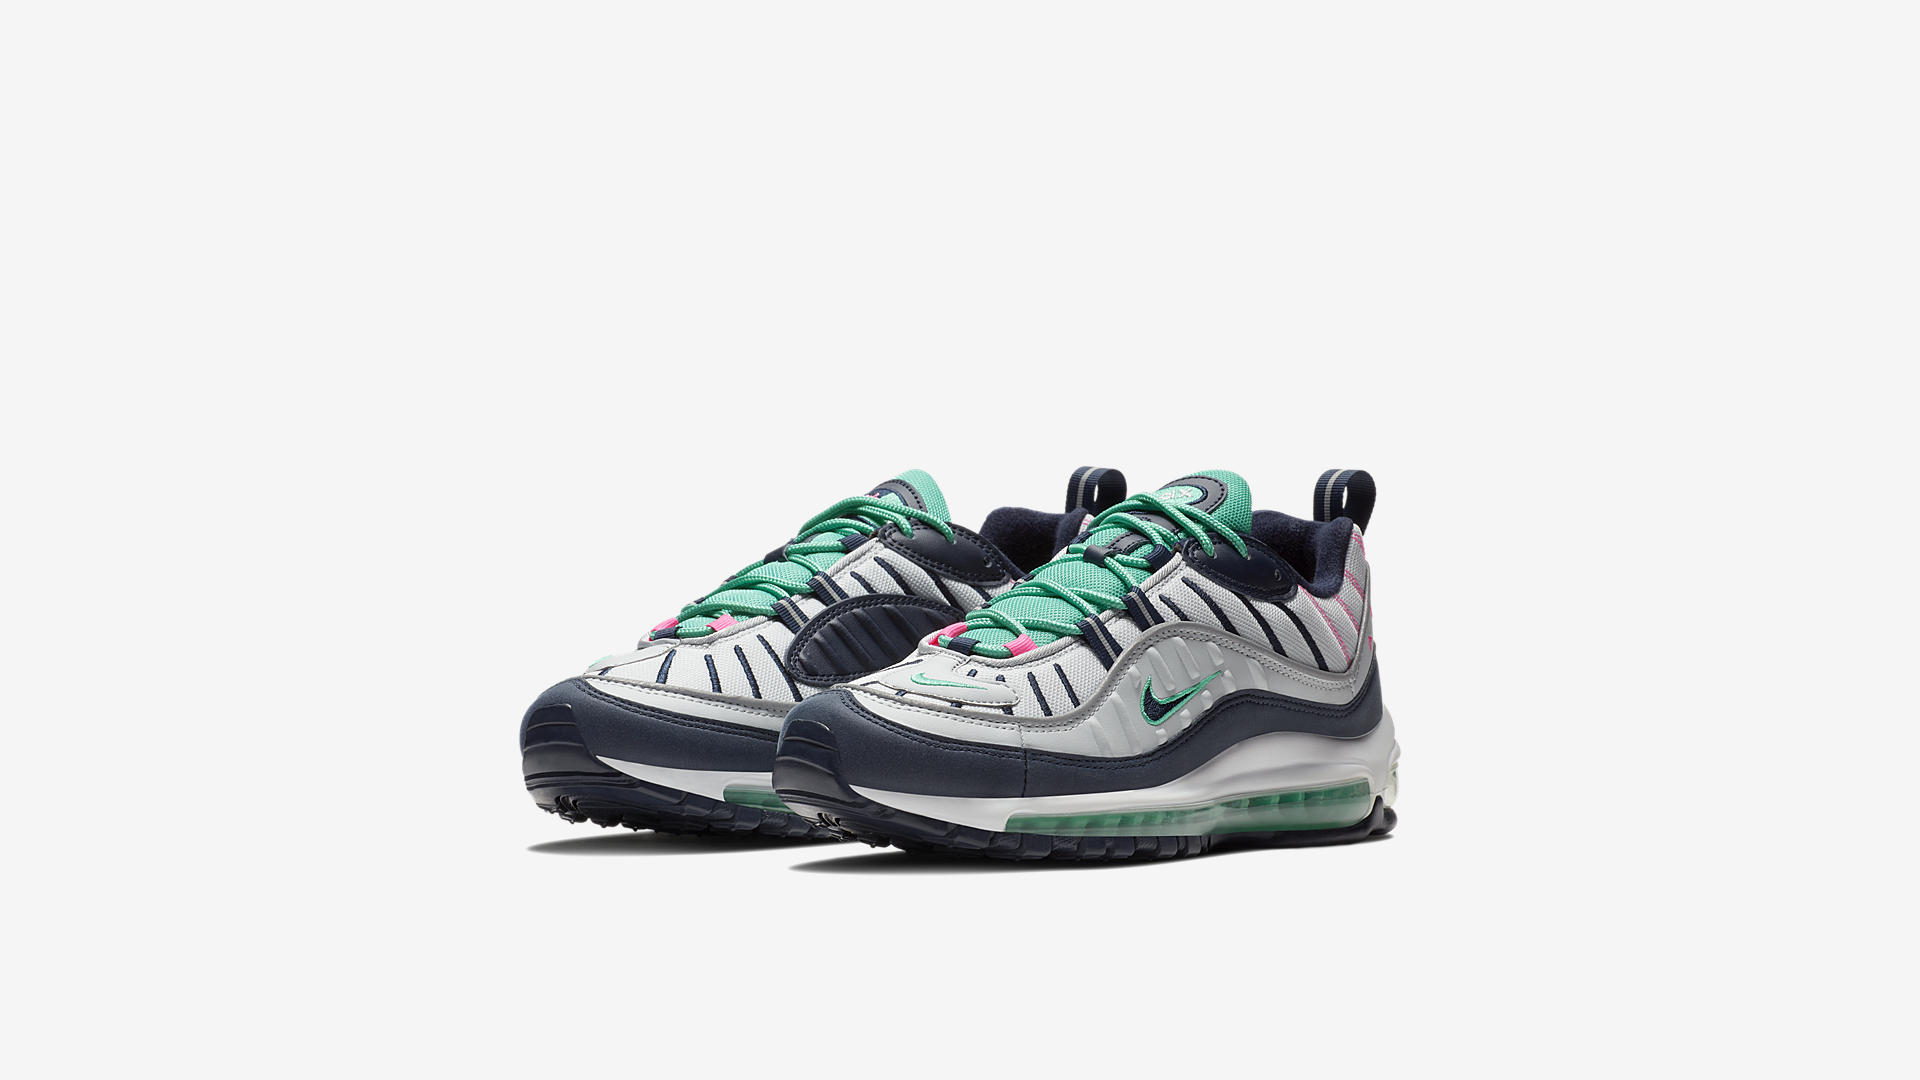 4 New Air Max 98 Colourways Drop This Week - Trapped Magazine